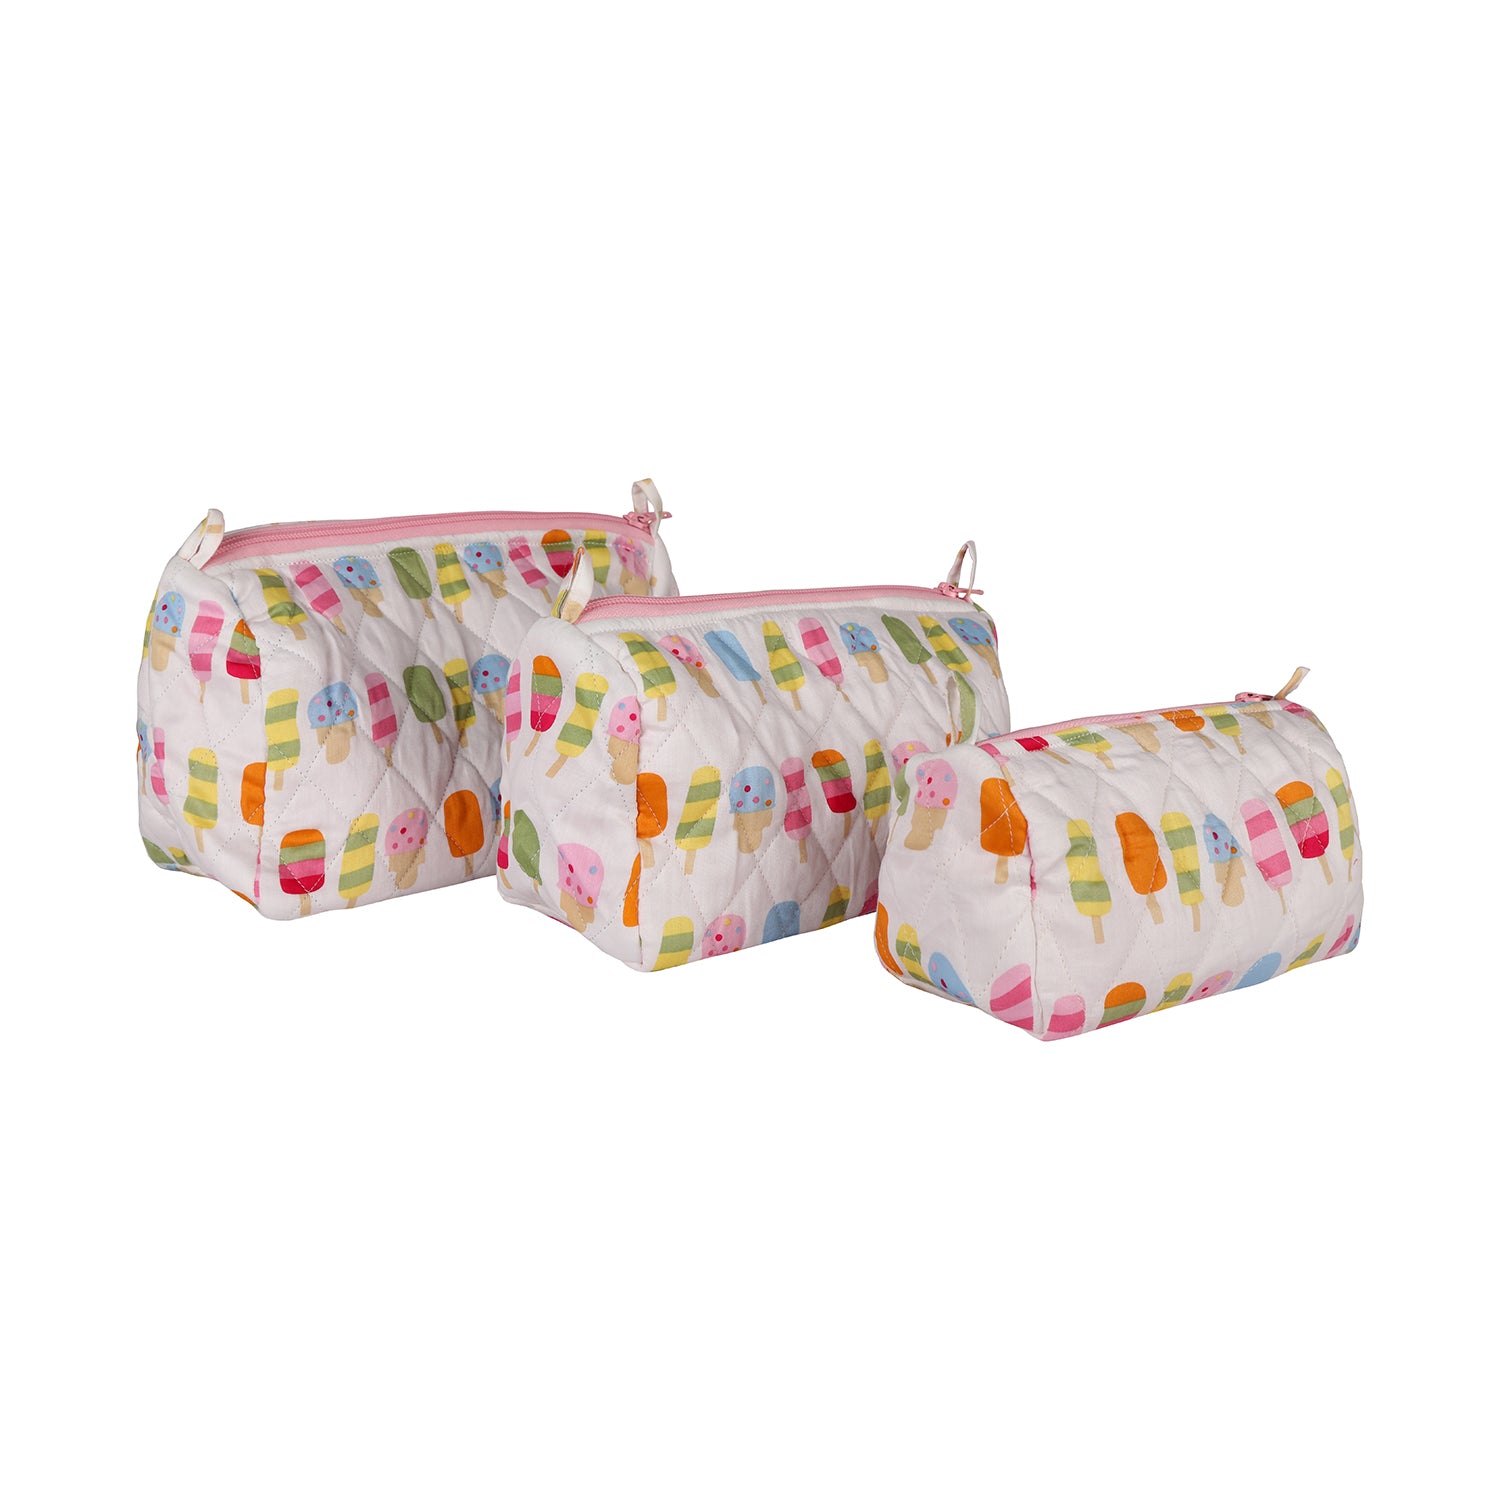 Pouch set- Popsicle (Set Of 3)